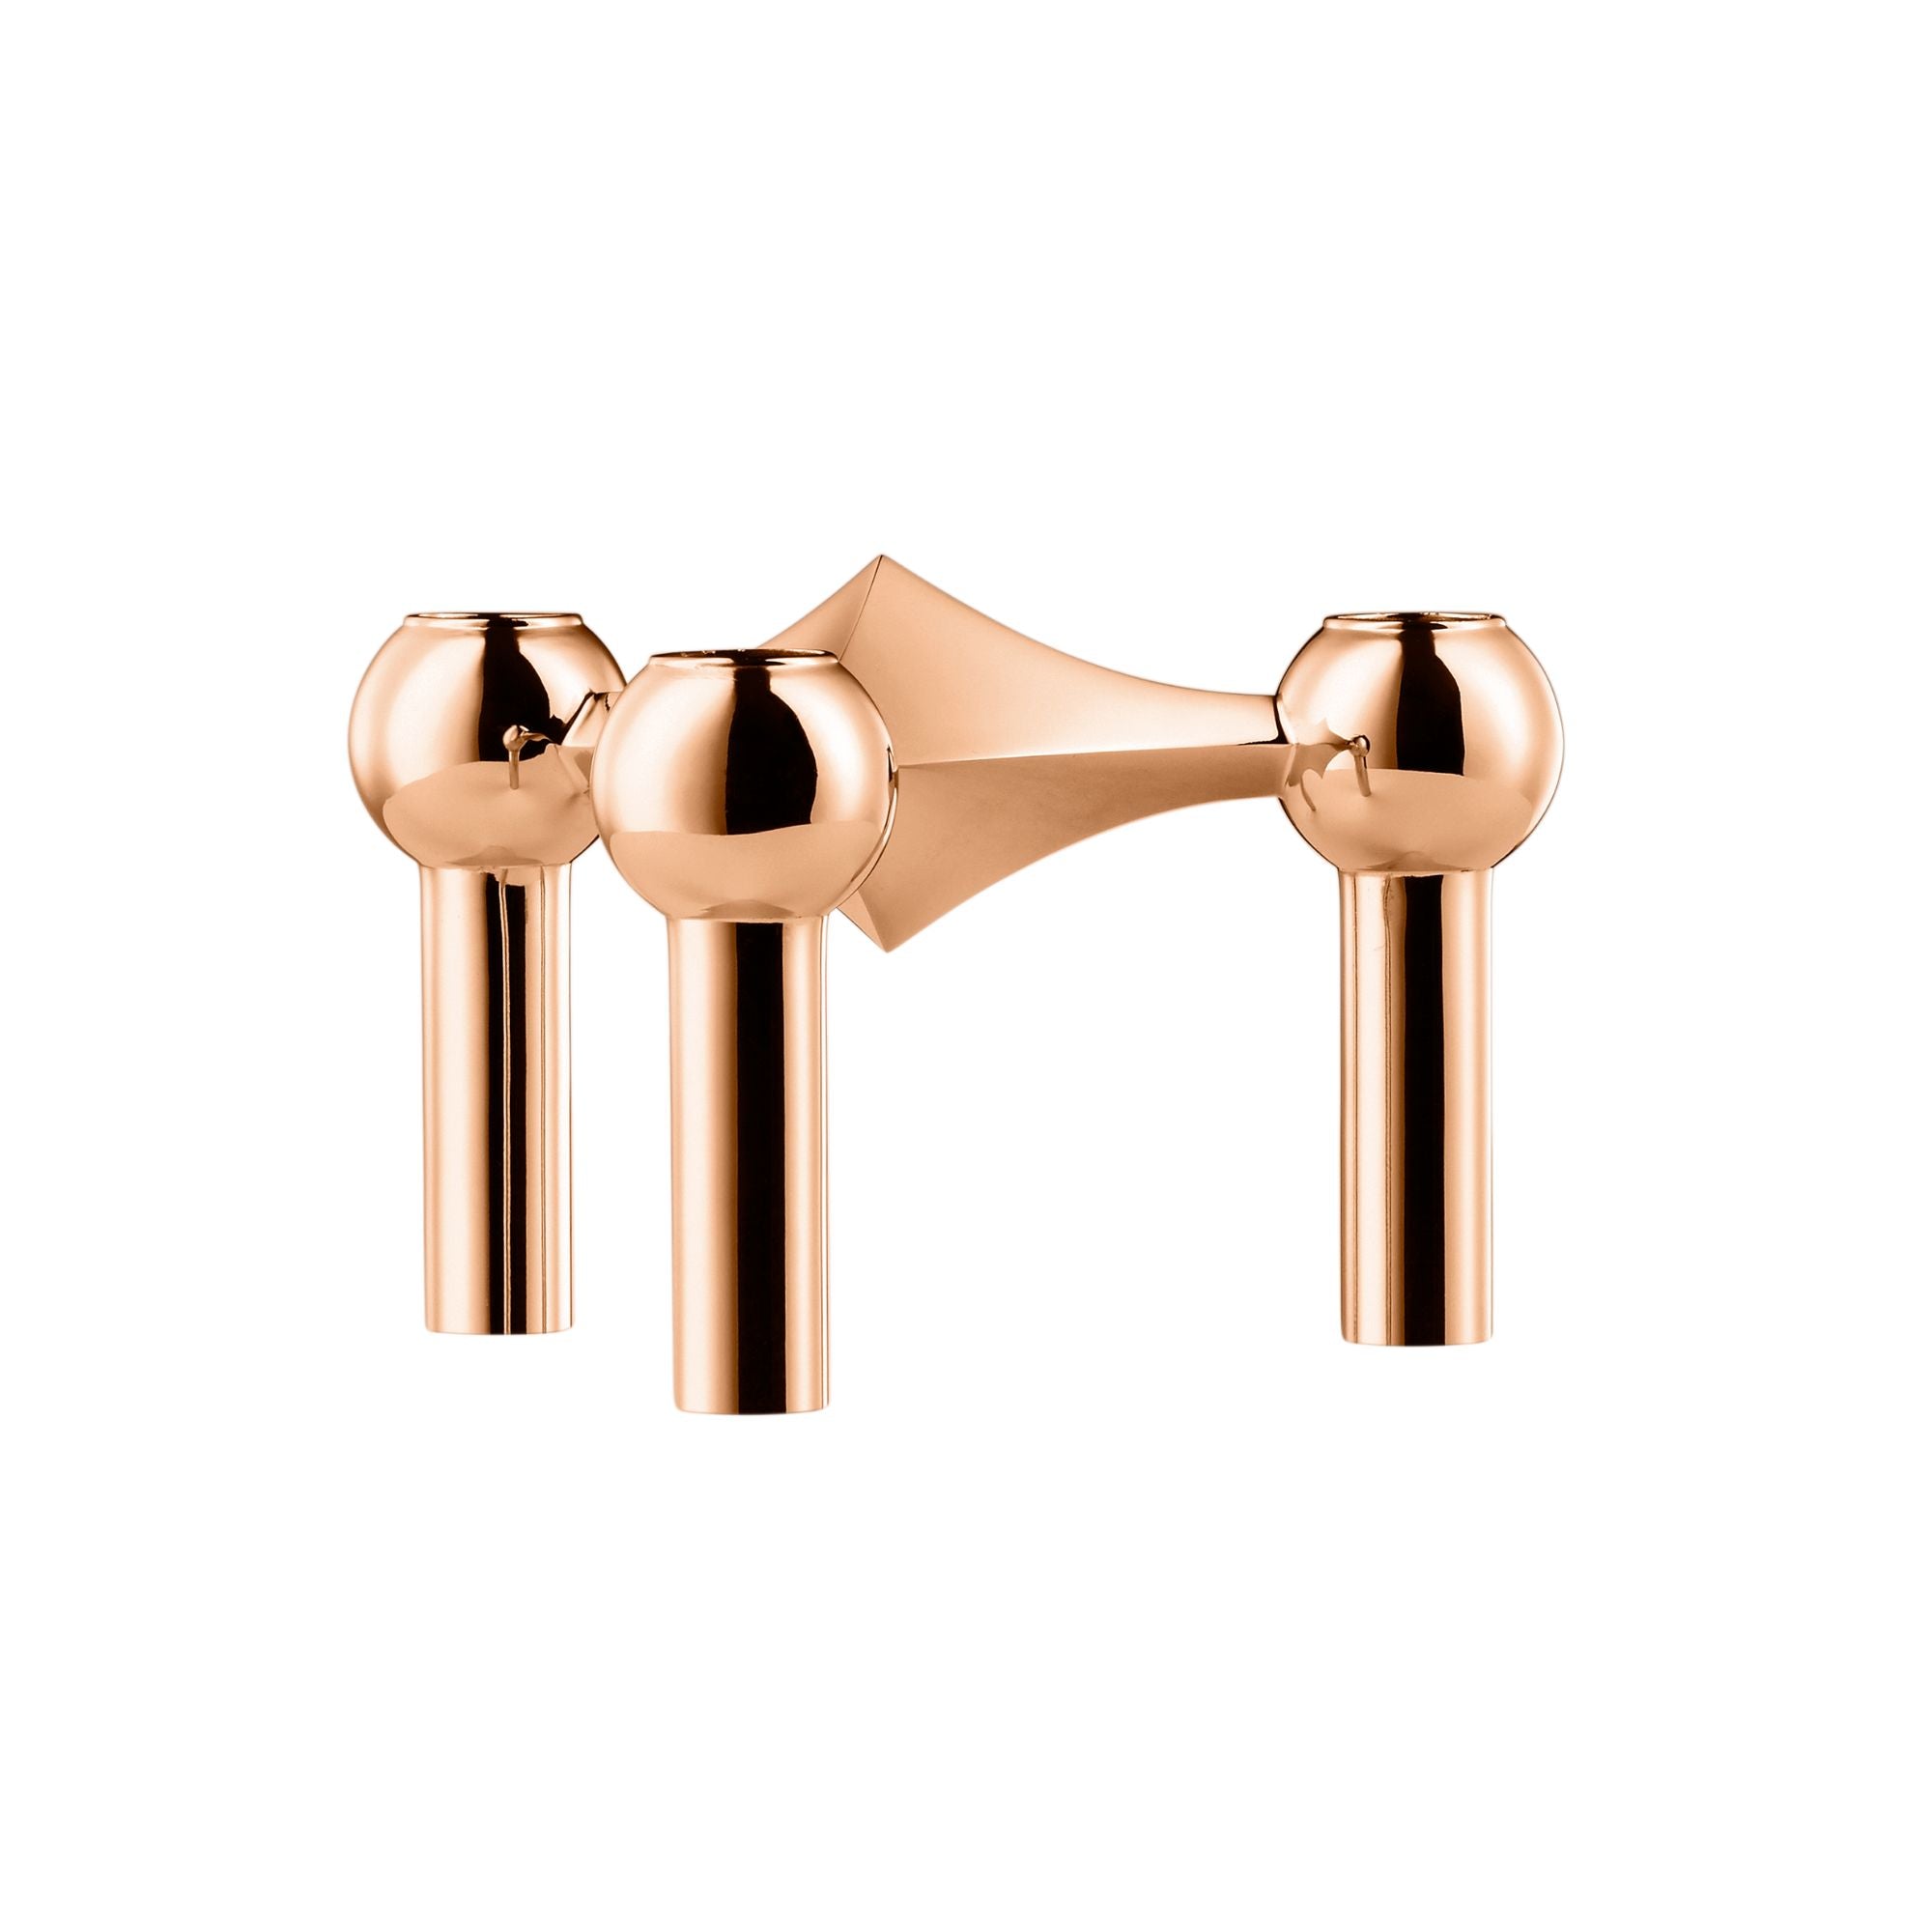 Modular Candle Holder - Rose Gold - THAT COOL LIVING